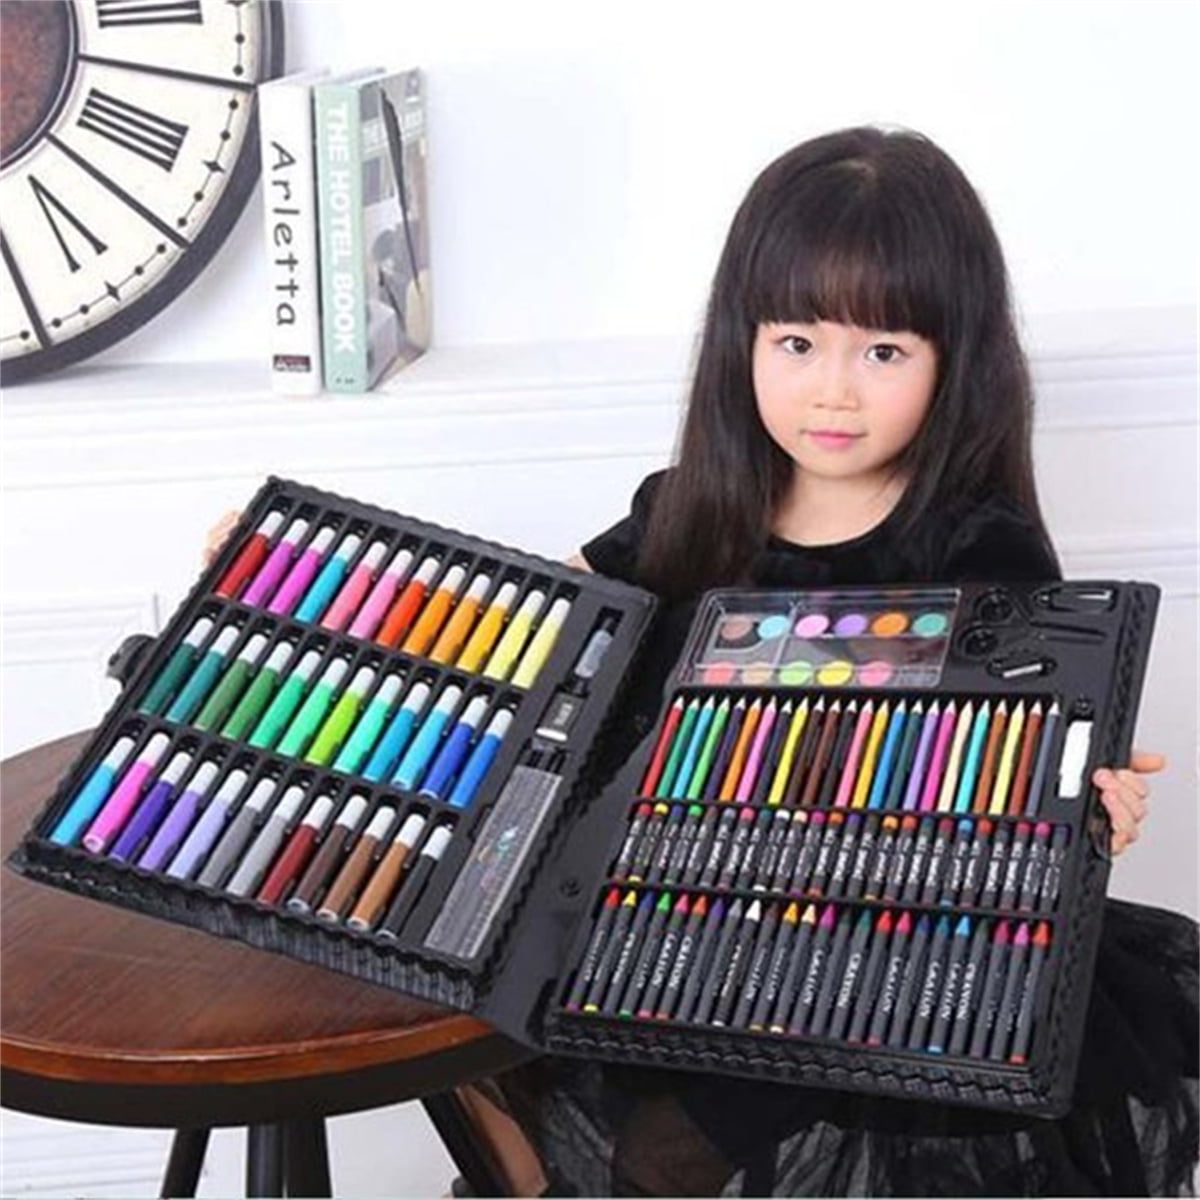 168 Pieces Art Supplies Set Deluxe Art Creativity Painting Drawing Sets For  Adult & Kids Colored Pencil Kit For Artists Drawing - Drawing Toys -  AliExpress